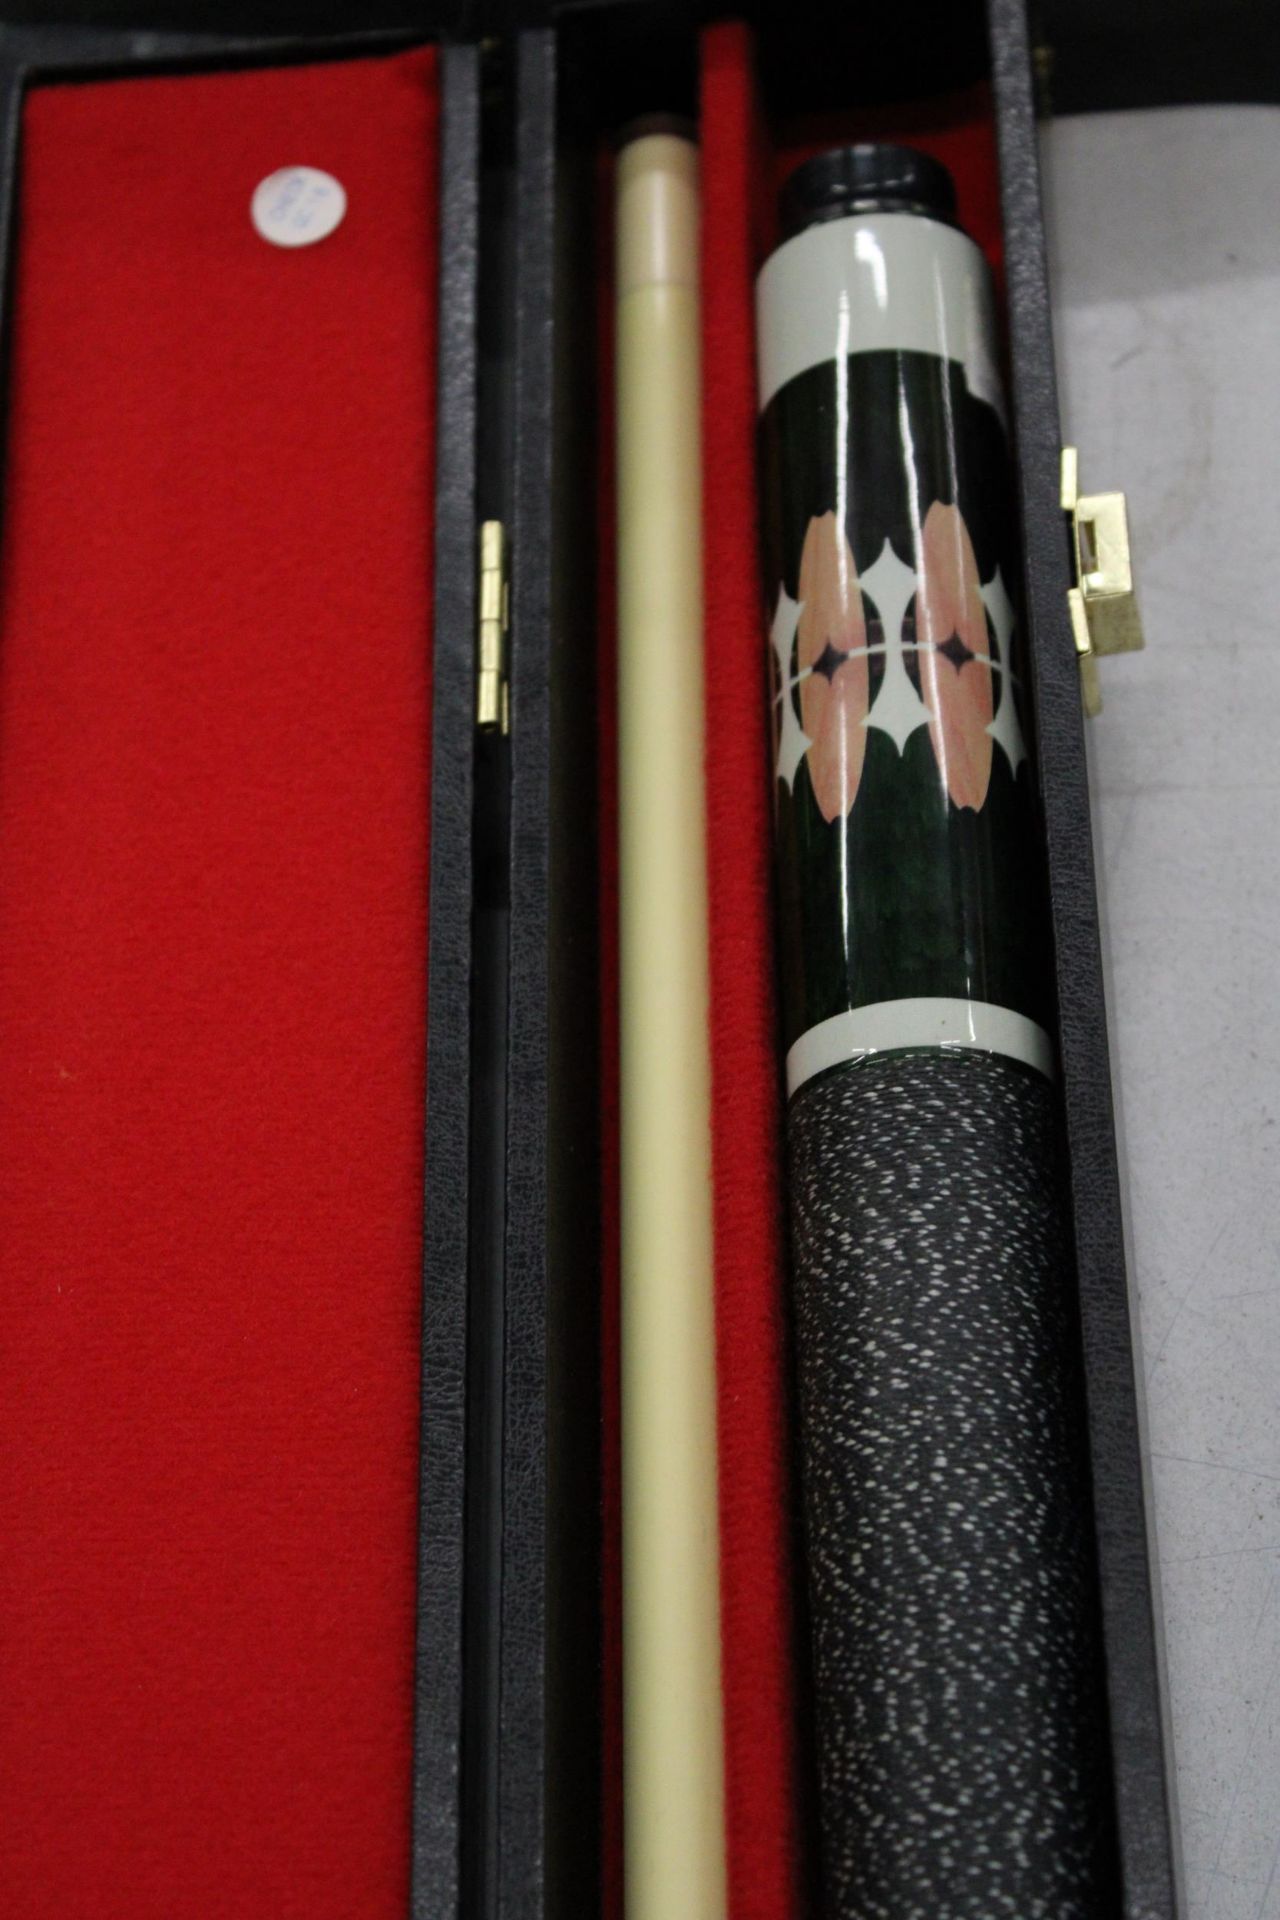 A DECORATIVE POOL CUE IN A HARD CASE - Image 4 of 5